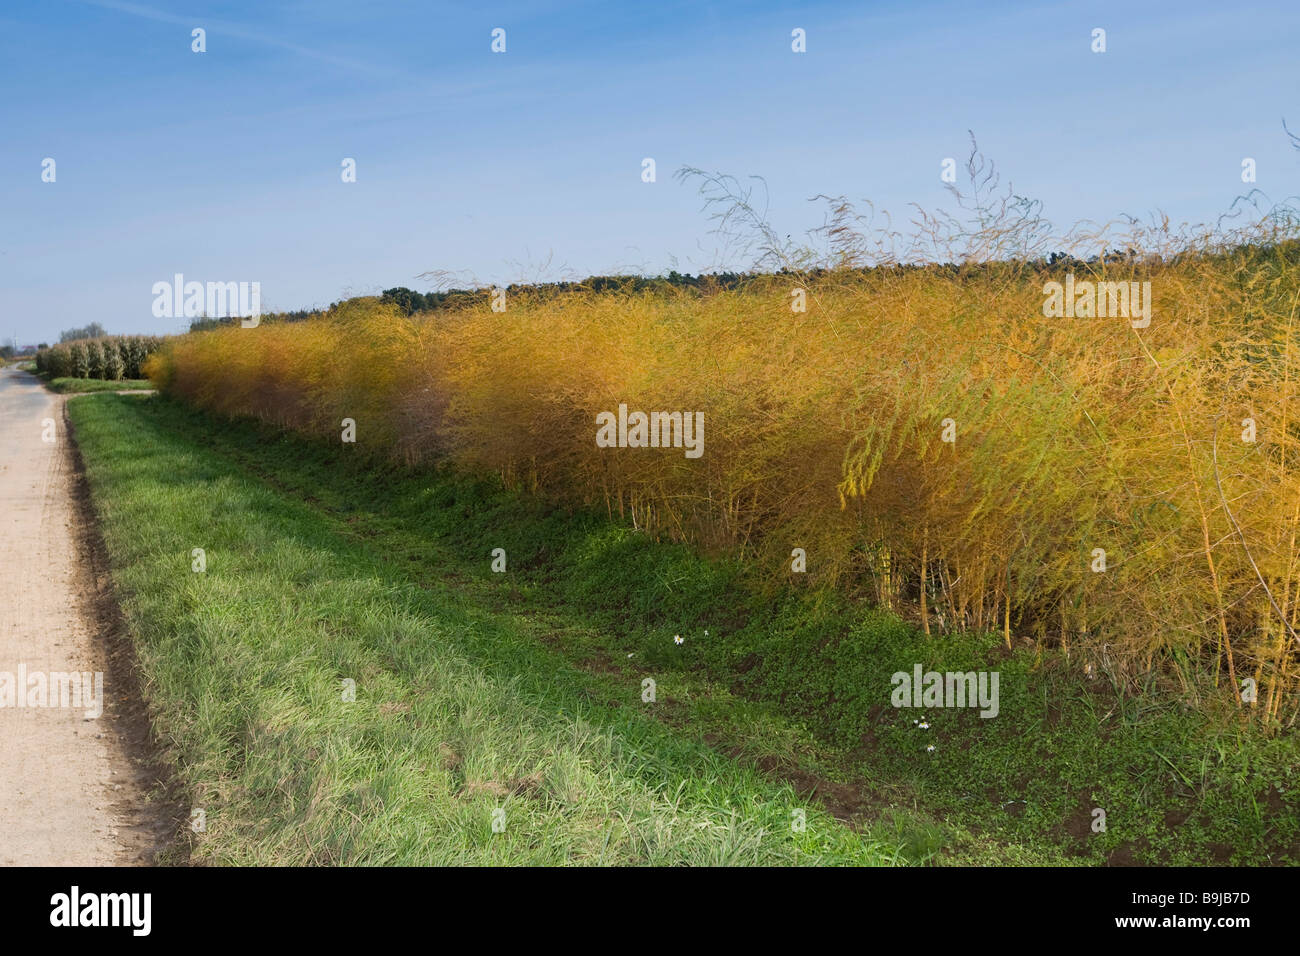 Field of withered asparagus or common asparagus (Asparagus officinalis L.), Hesse, Germany, Europe Stock Photo